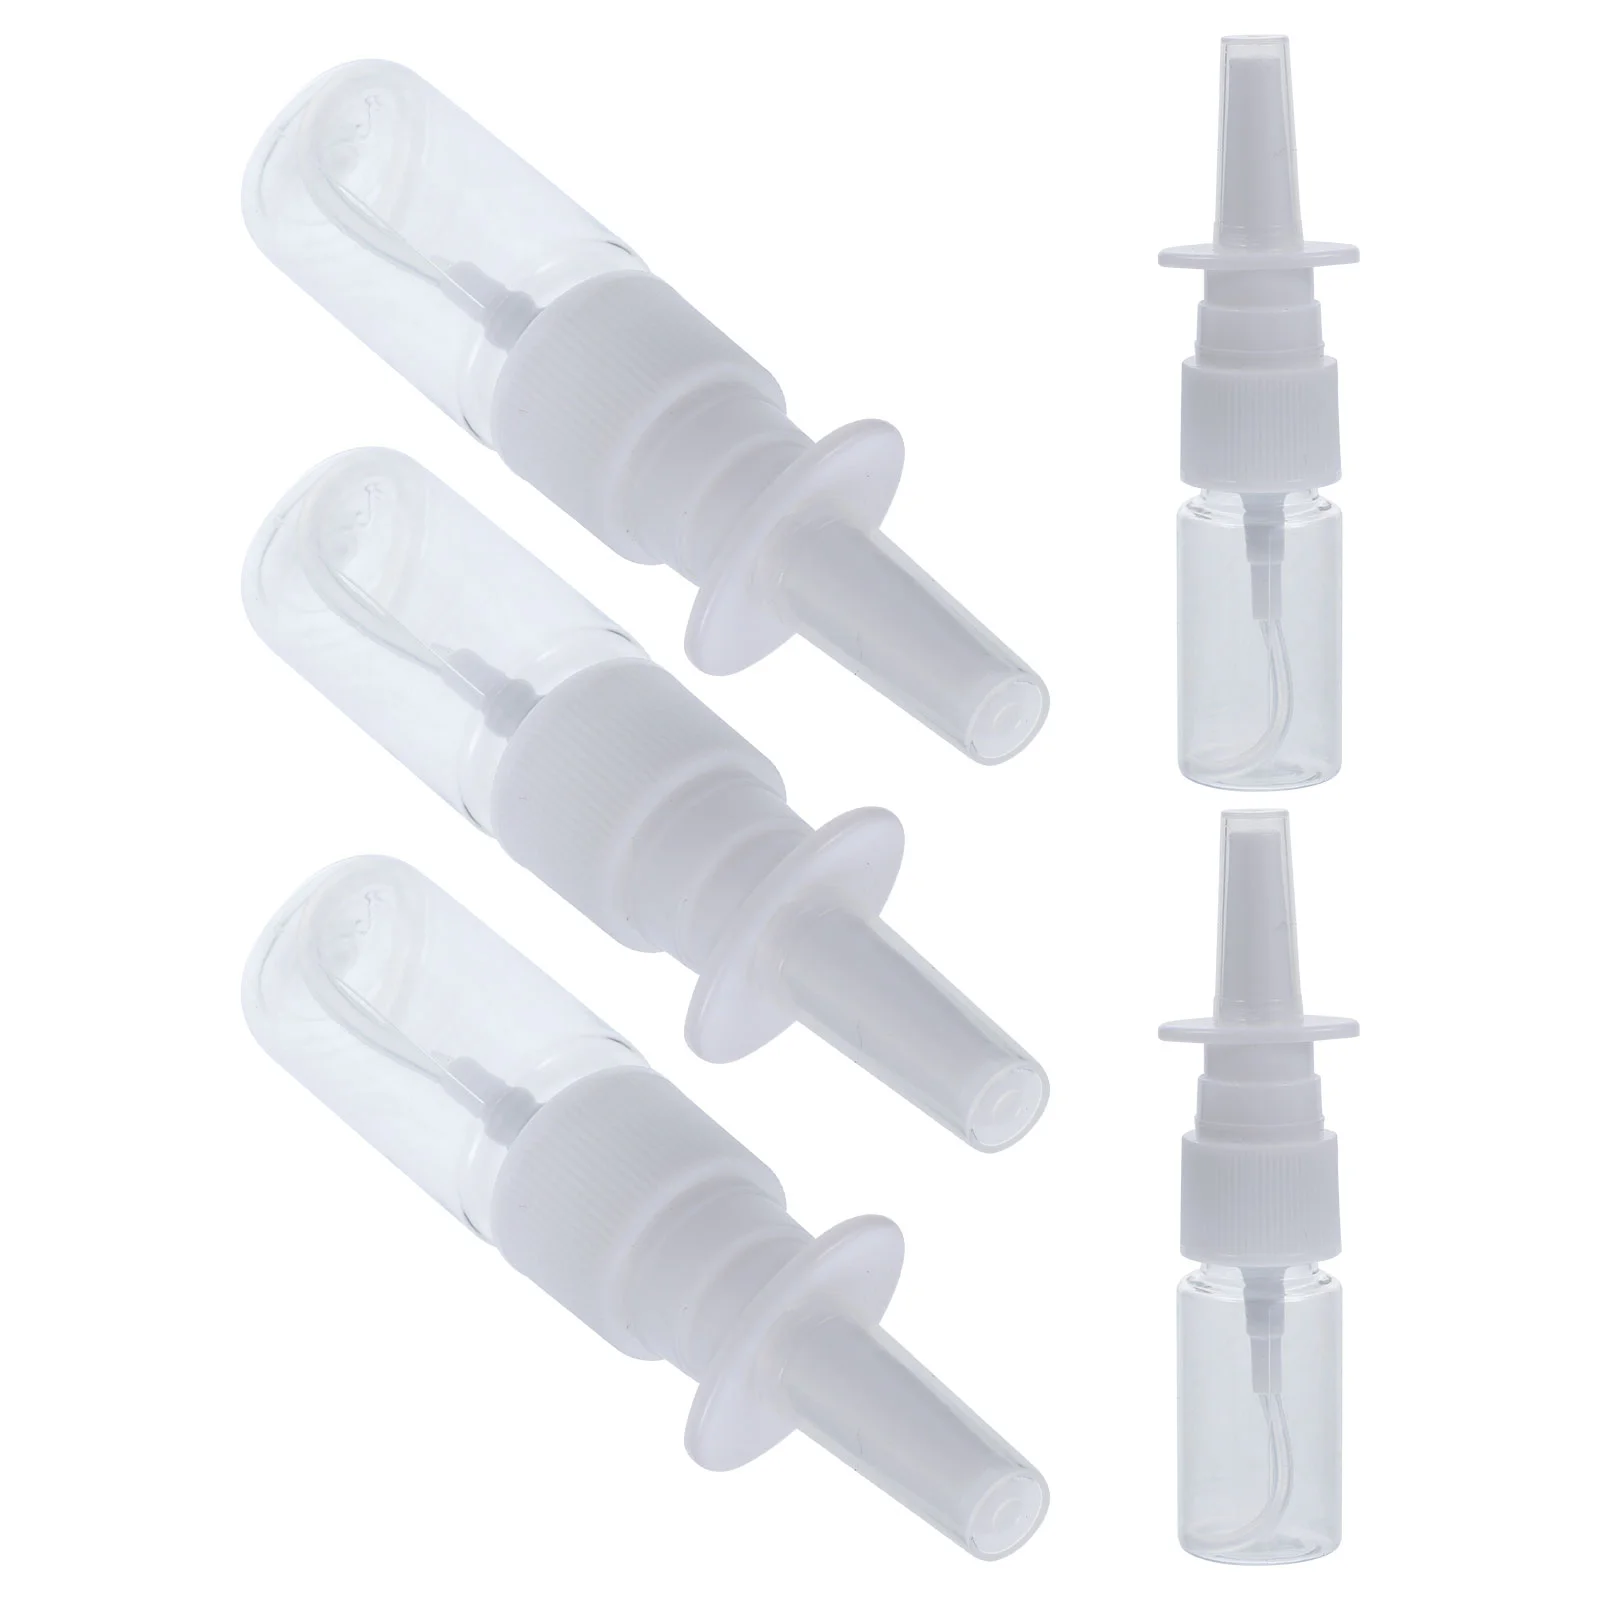 5 Pcs Cleaning Spray Bottles Nasal Dispenser Refillable Clear Container Fine Mist Sprayers Storage